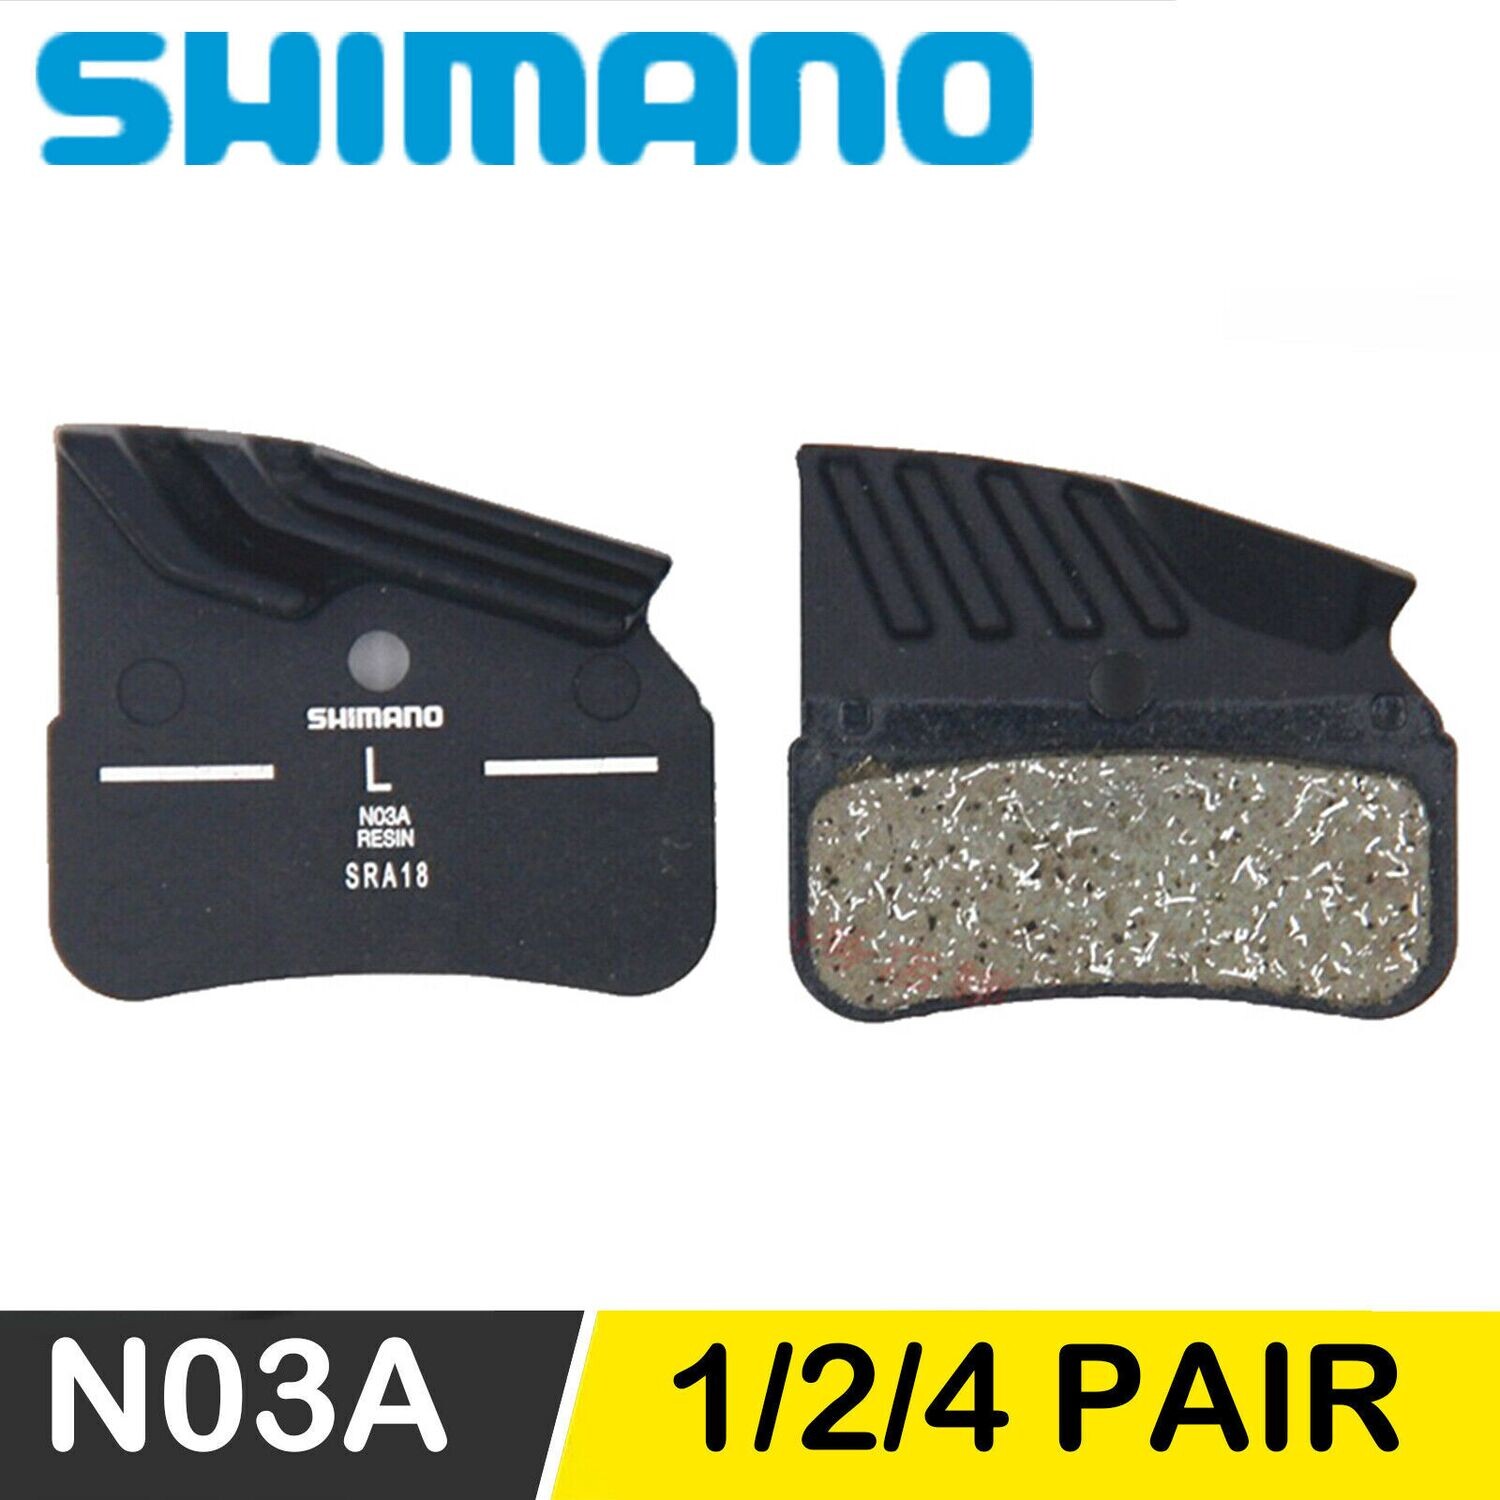 Shimano N03A Resin Disc Brake Pads With Fin - For BR-M9120